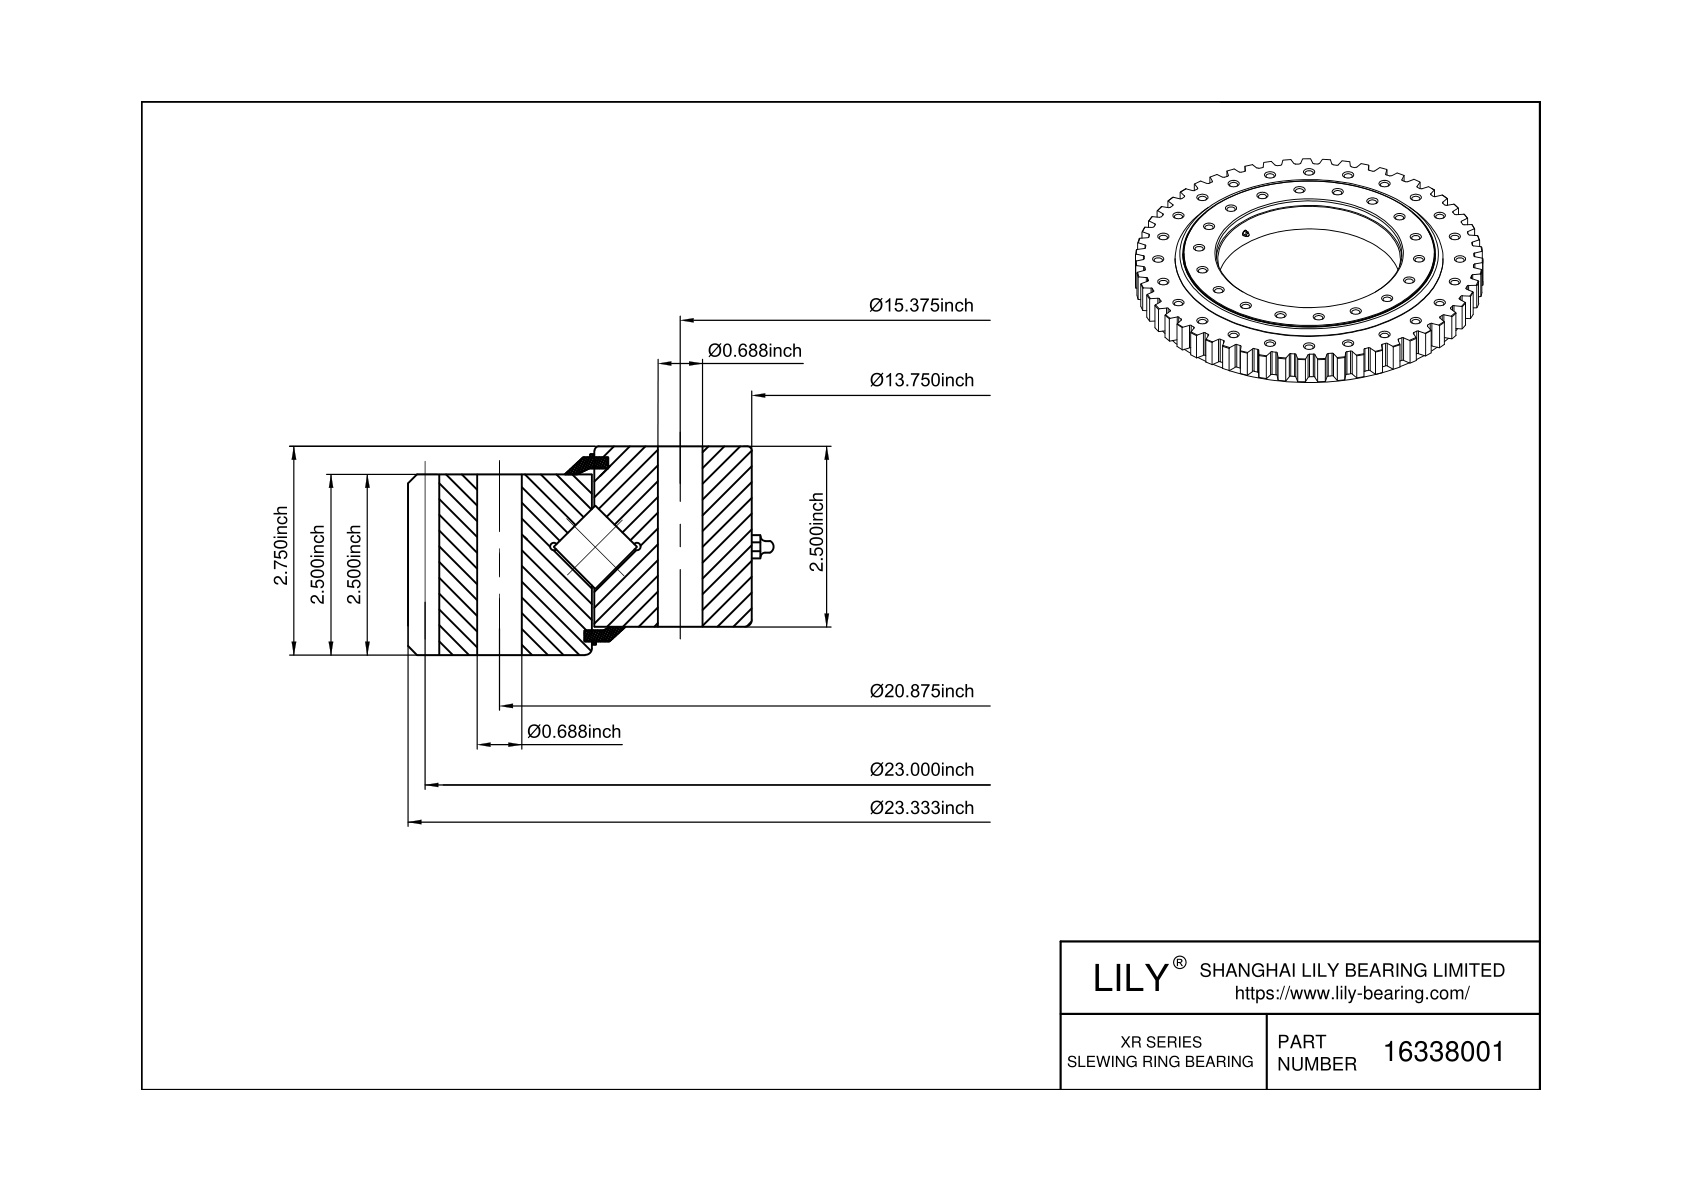 16338001 XR Series cad drawing